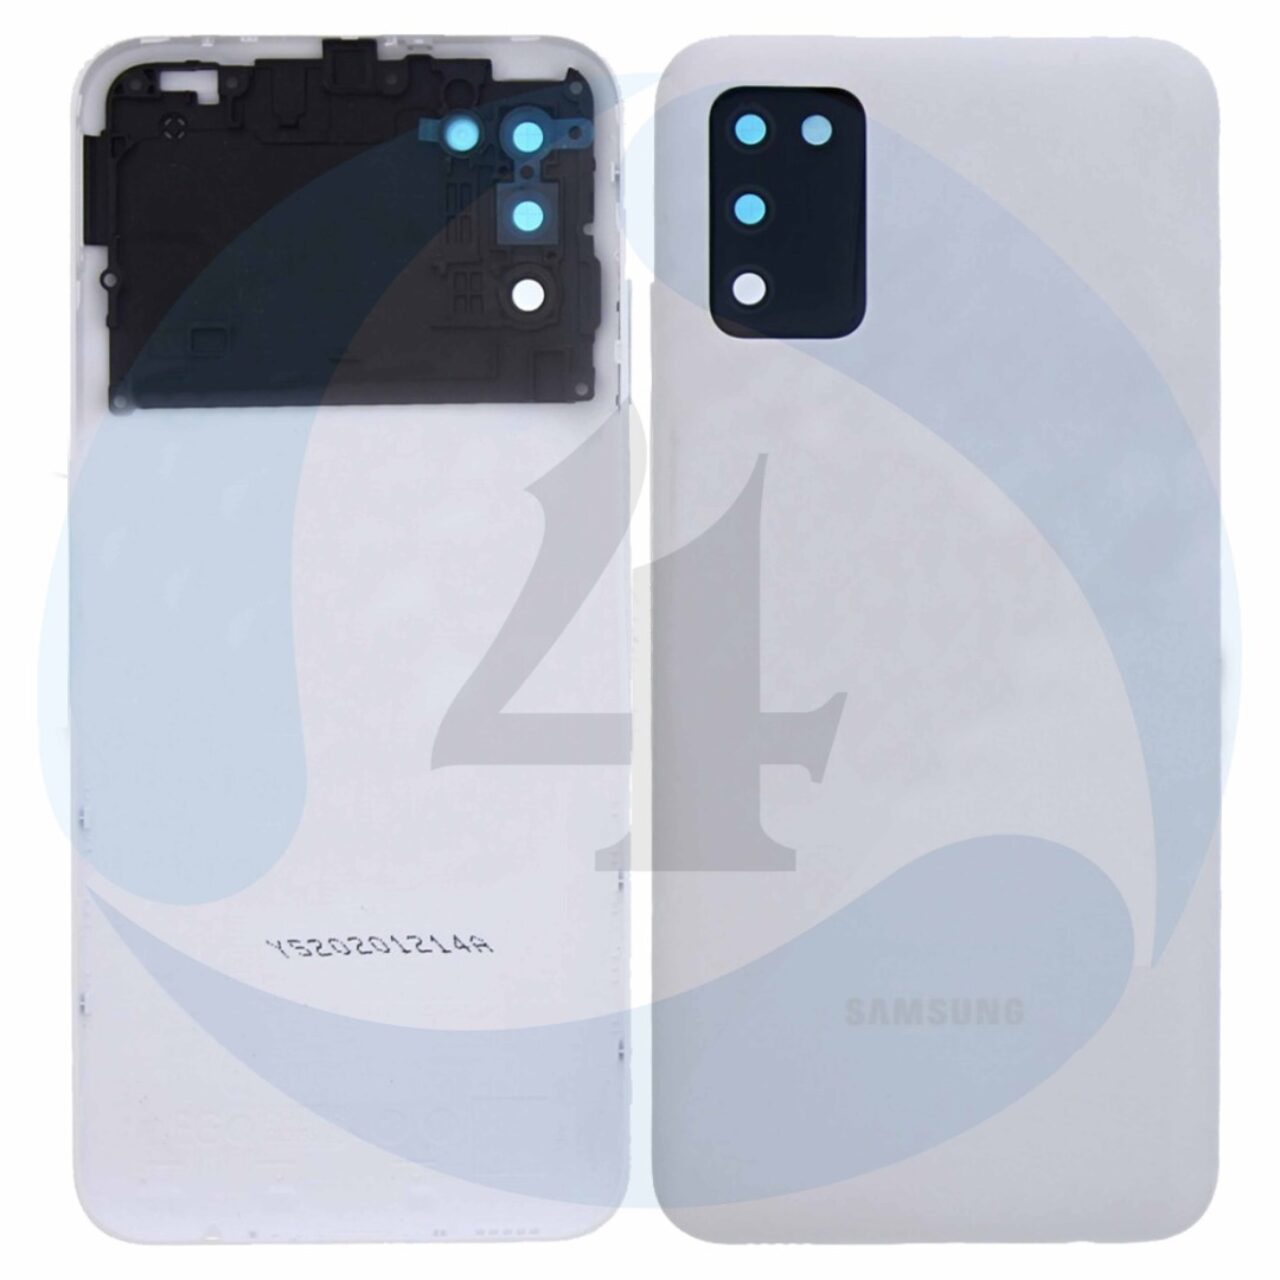 Backcover White For Samsung Galaxy A02s SM A025